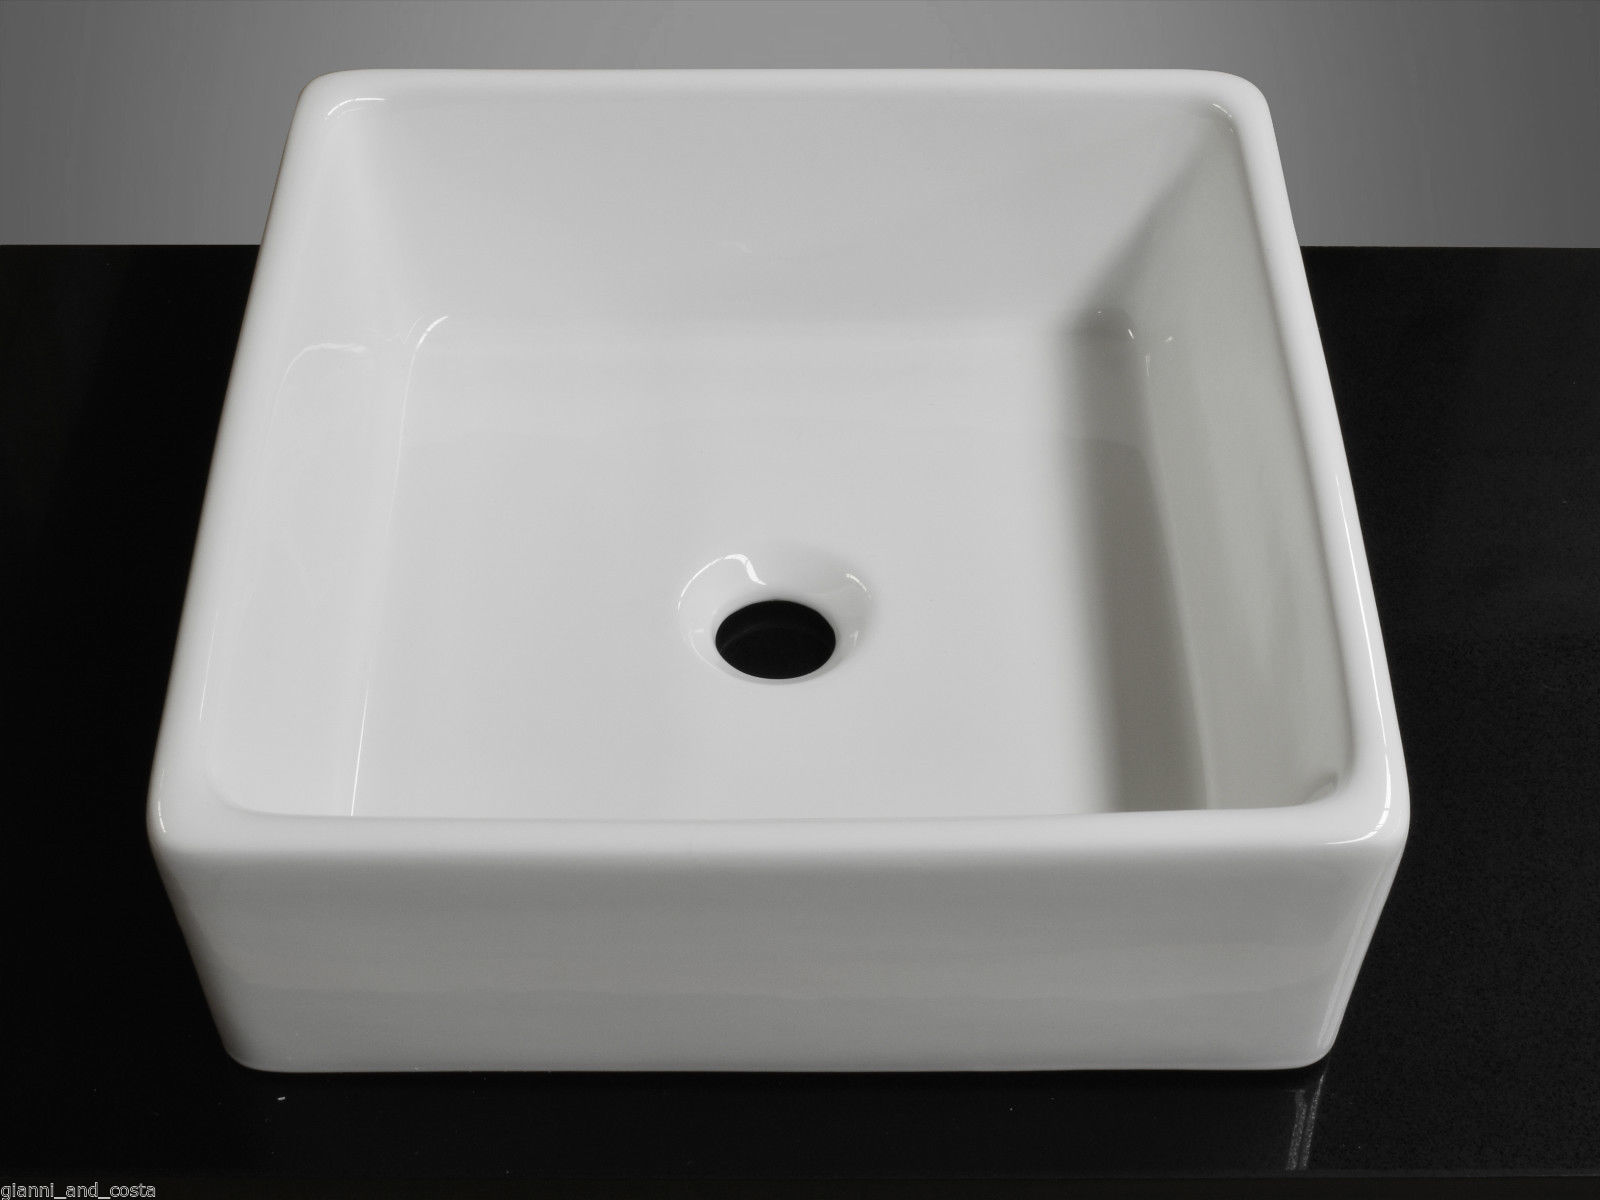  CERAMIC square ABOVE COUNTER TOP BASIN FOR VANITY INCLUDES POP UP WASTE